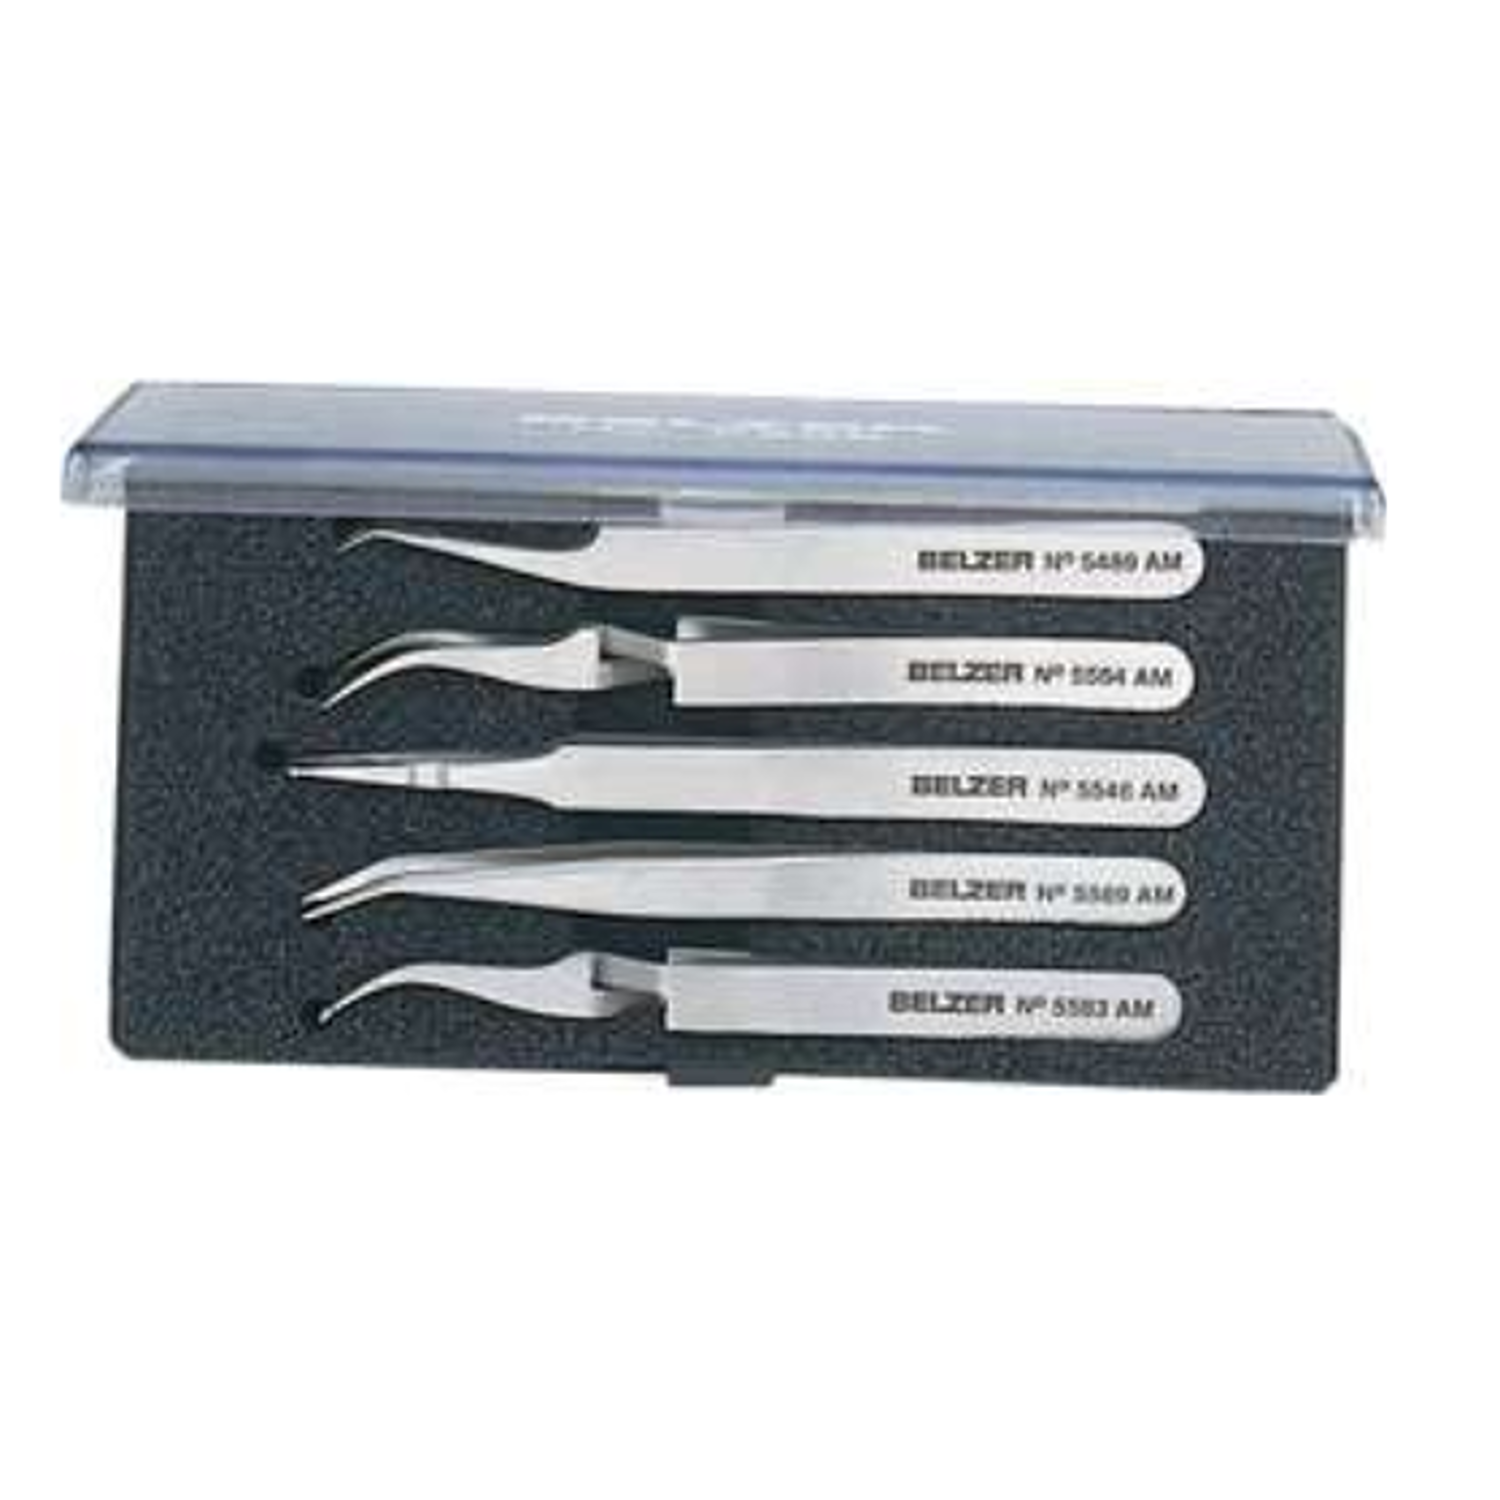 BAHCO 5568/5 Stainless Steel SMD Tweezers Set - 5 Pcs - Premium Tweezers from BAHCO - Shop now at Yew Aik.